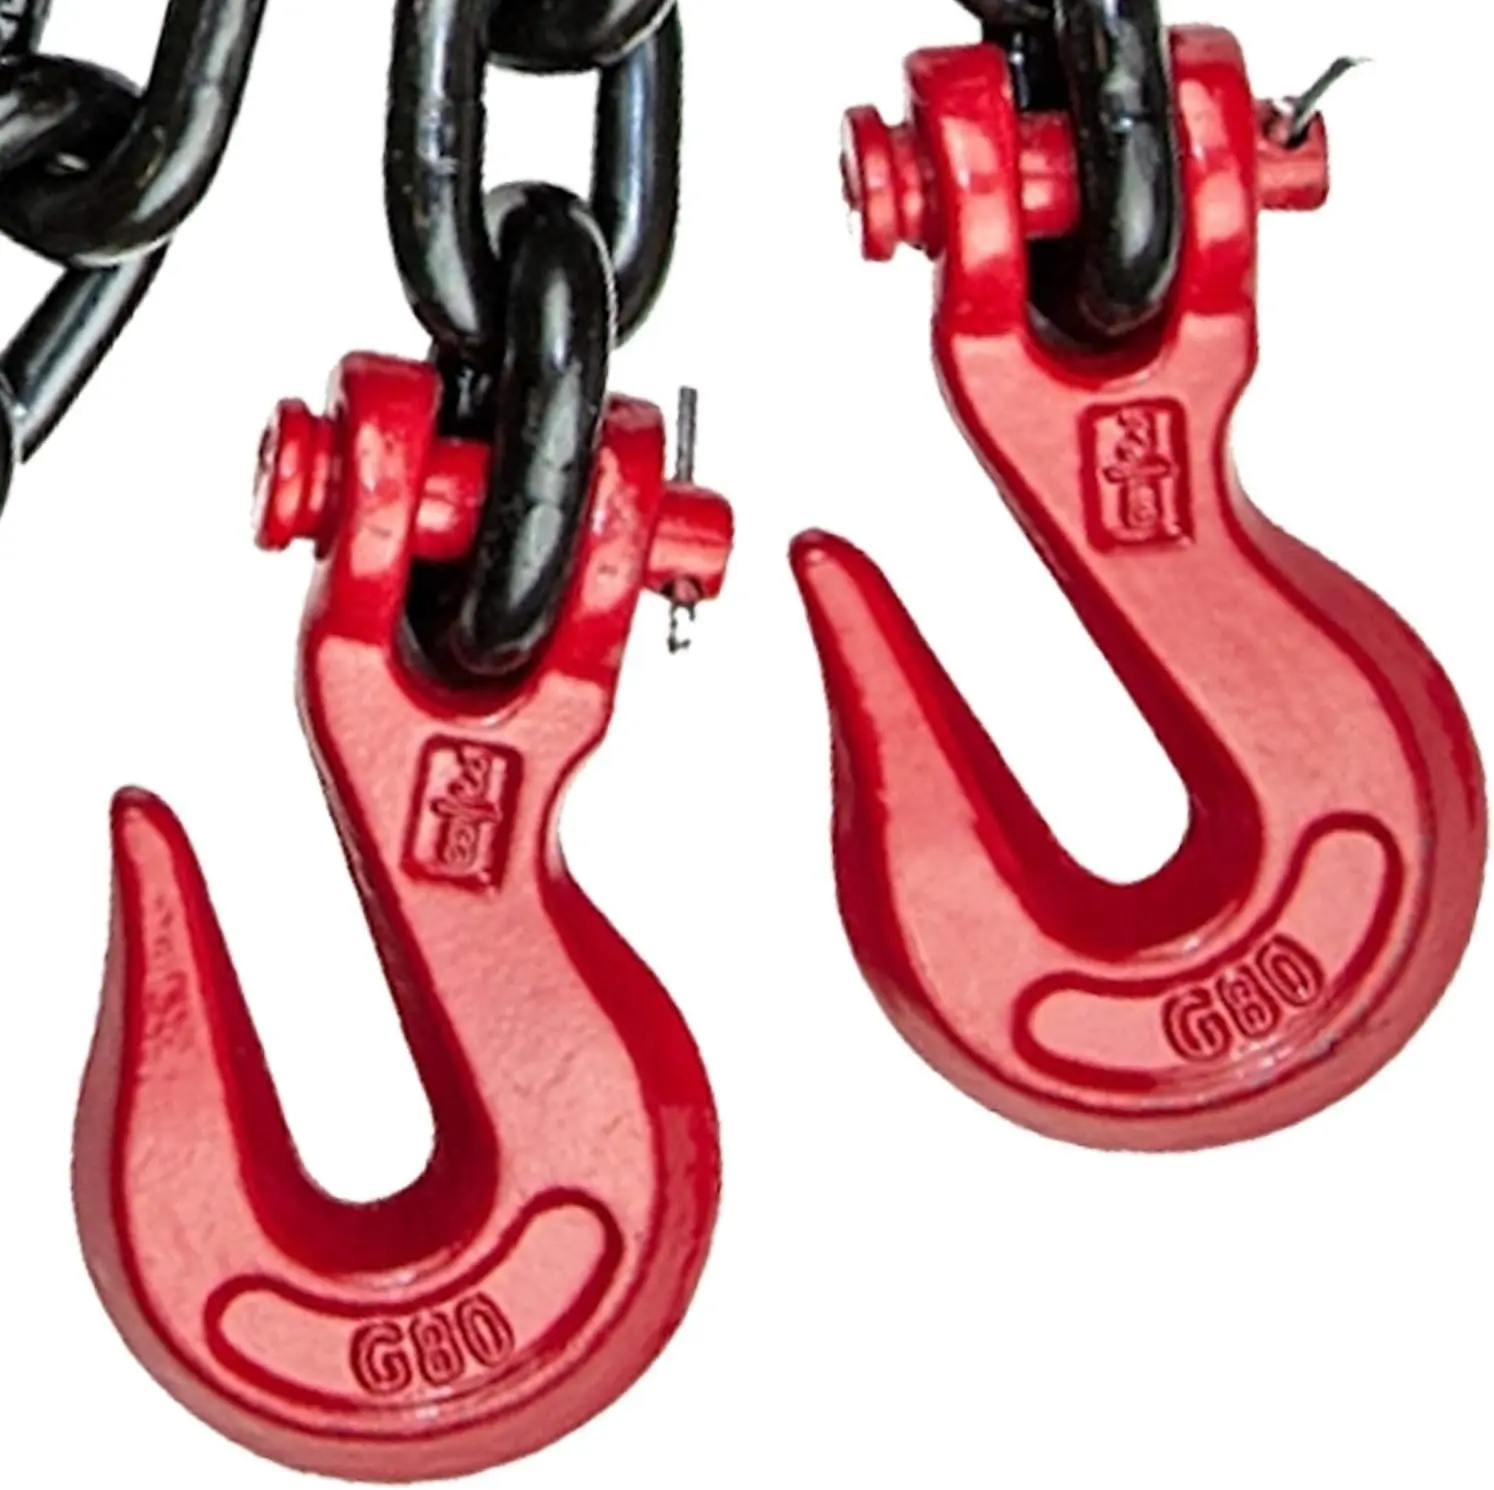 rab Hooks and Adjusters G80 Lifting Sling Chains 5 Ton Capacity, 5FT